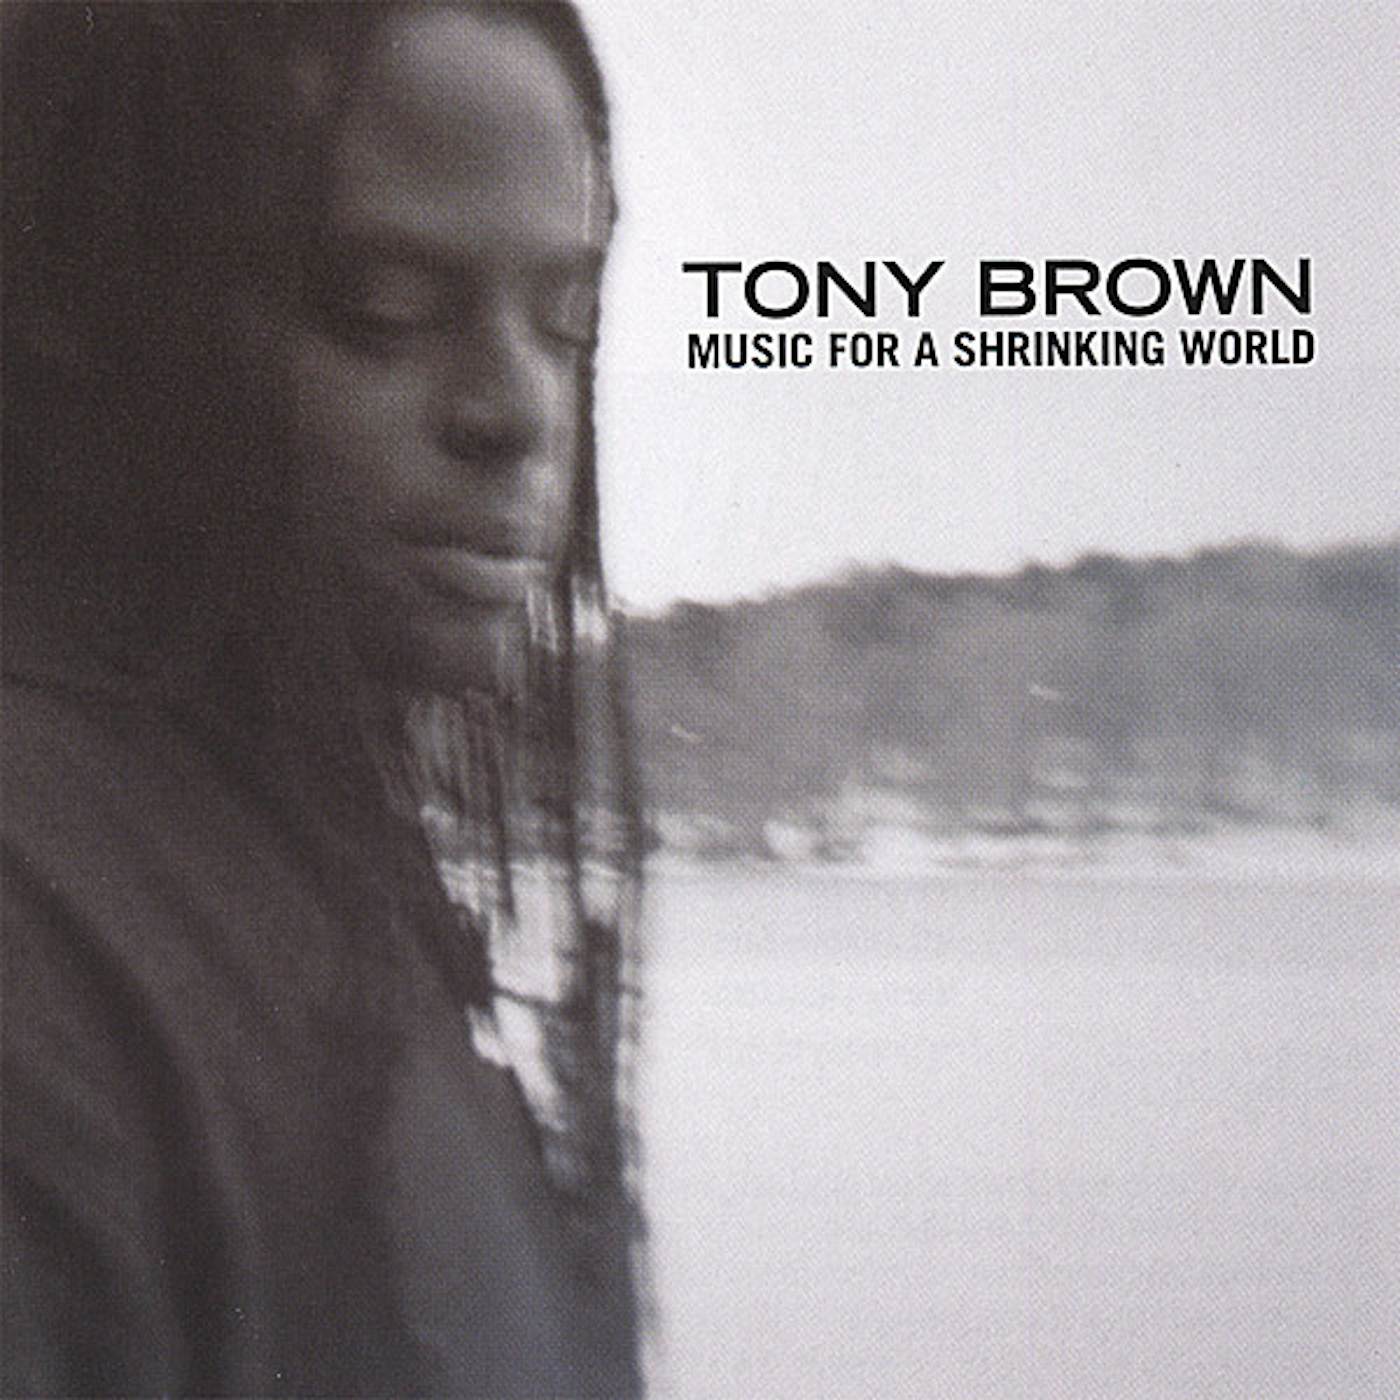 Tony Brown MUSIC FOR A SHRINKING WORLD CD